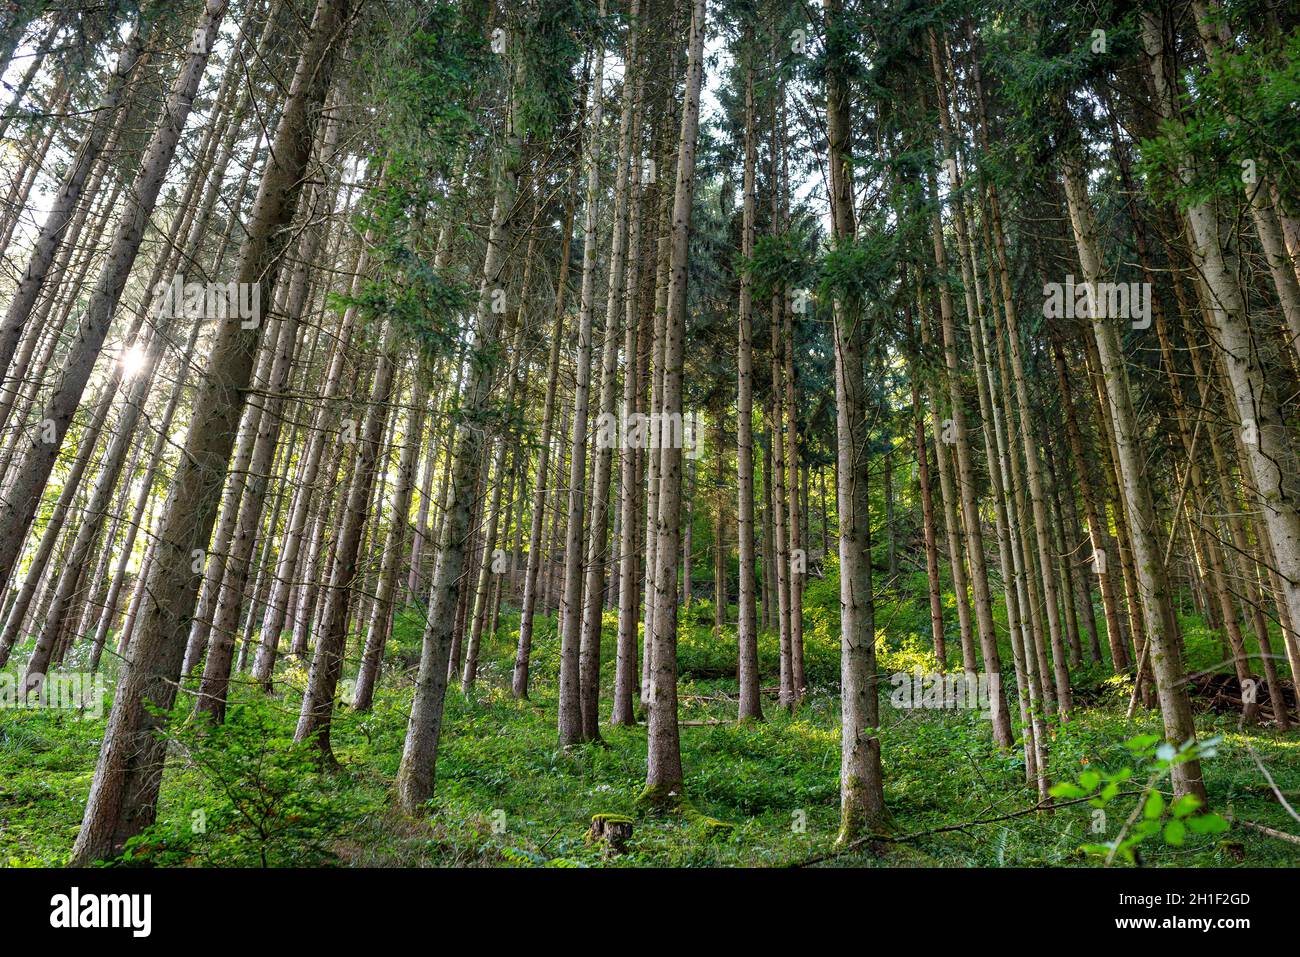 Tall conifers in a dense forest, view upwards of tree trunks, in the autumn season. Stock Photo